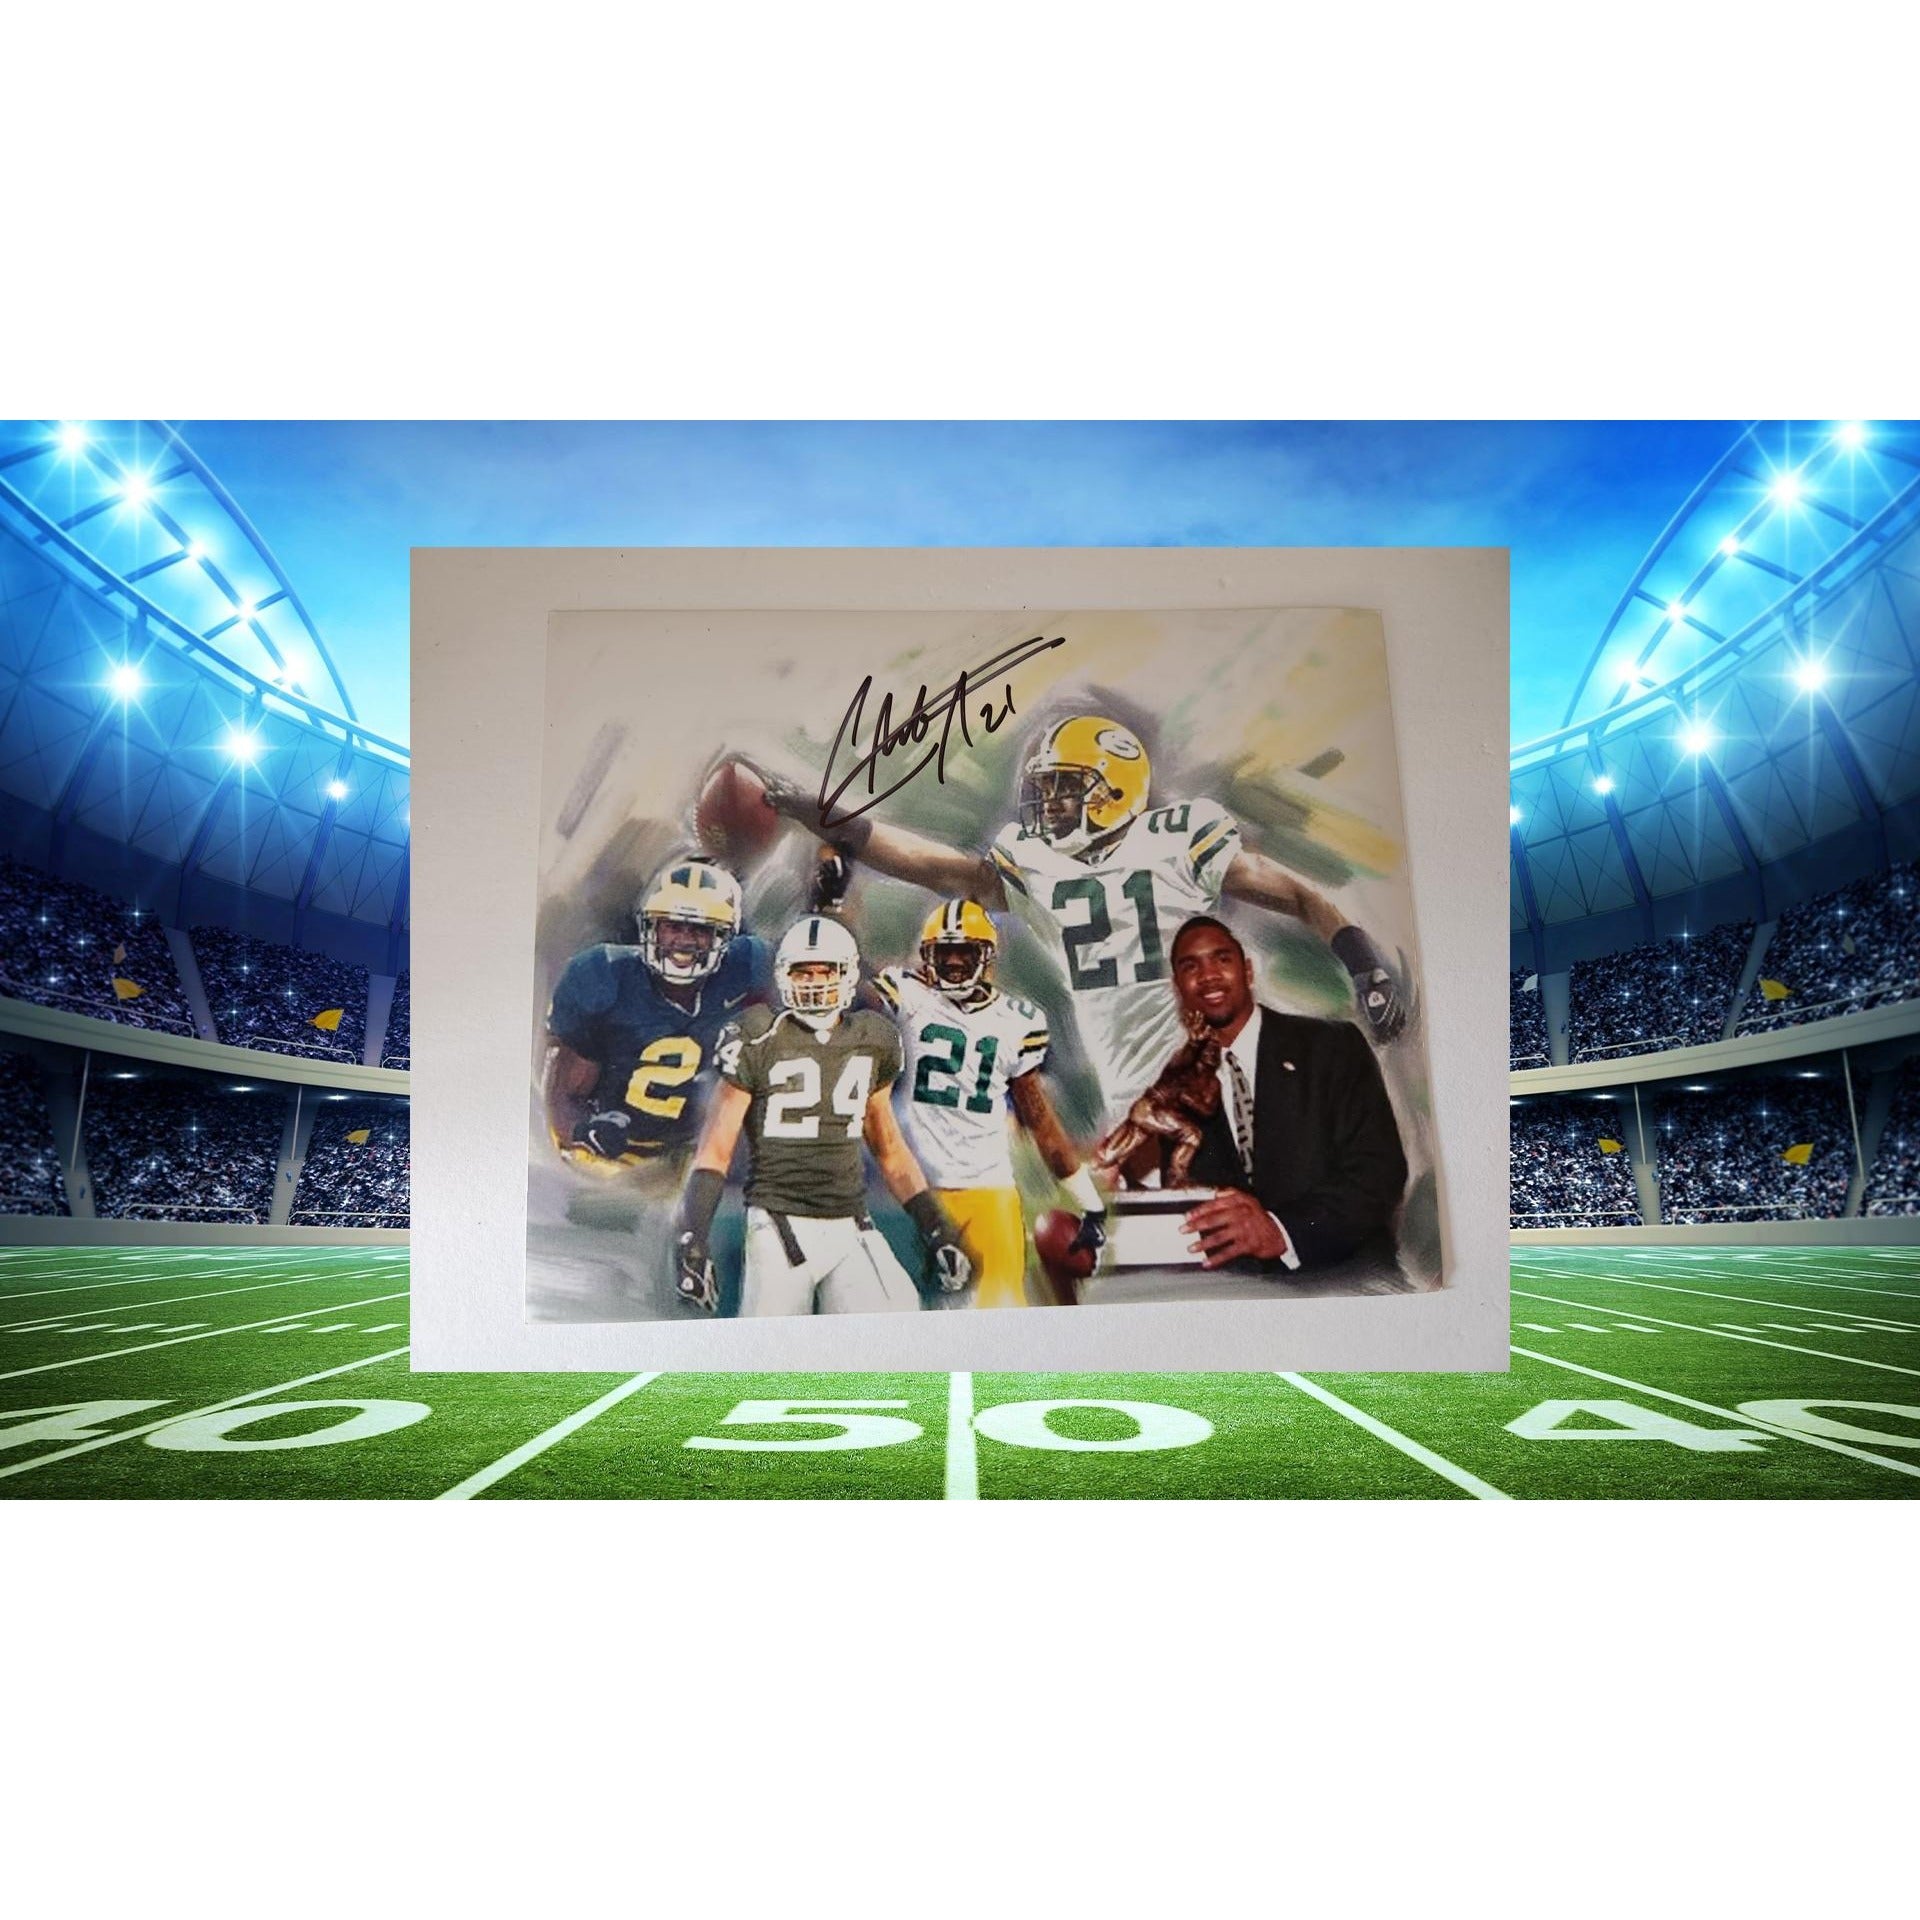 Charles Woodson University of Michigan Green Bay Packers NFL Hall of Famer 8x10 photo signed